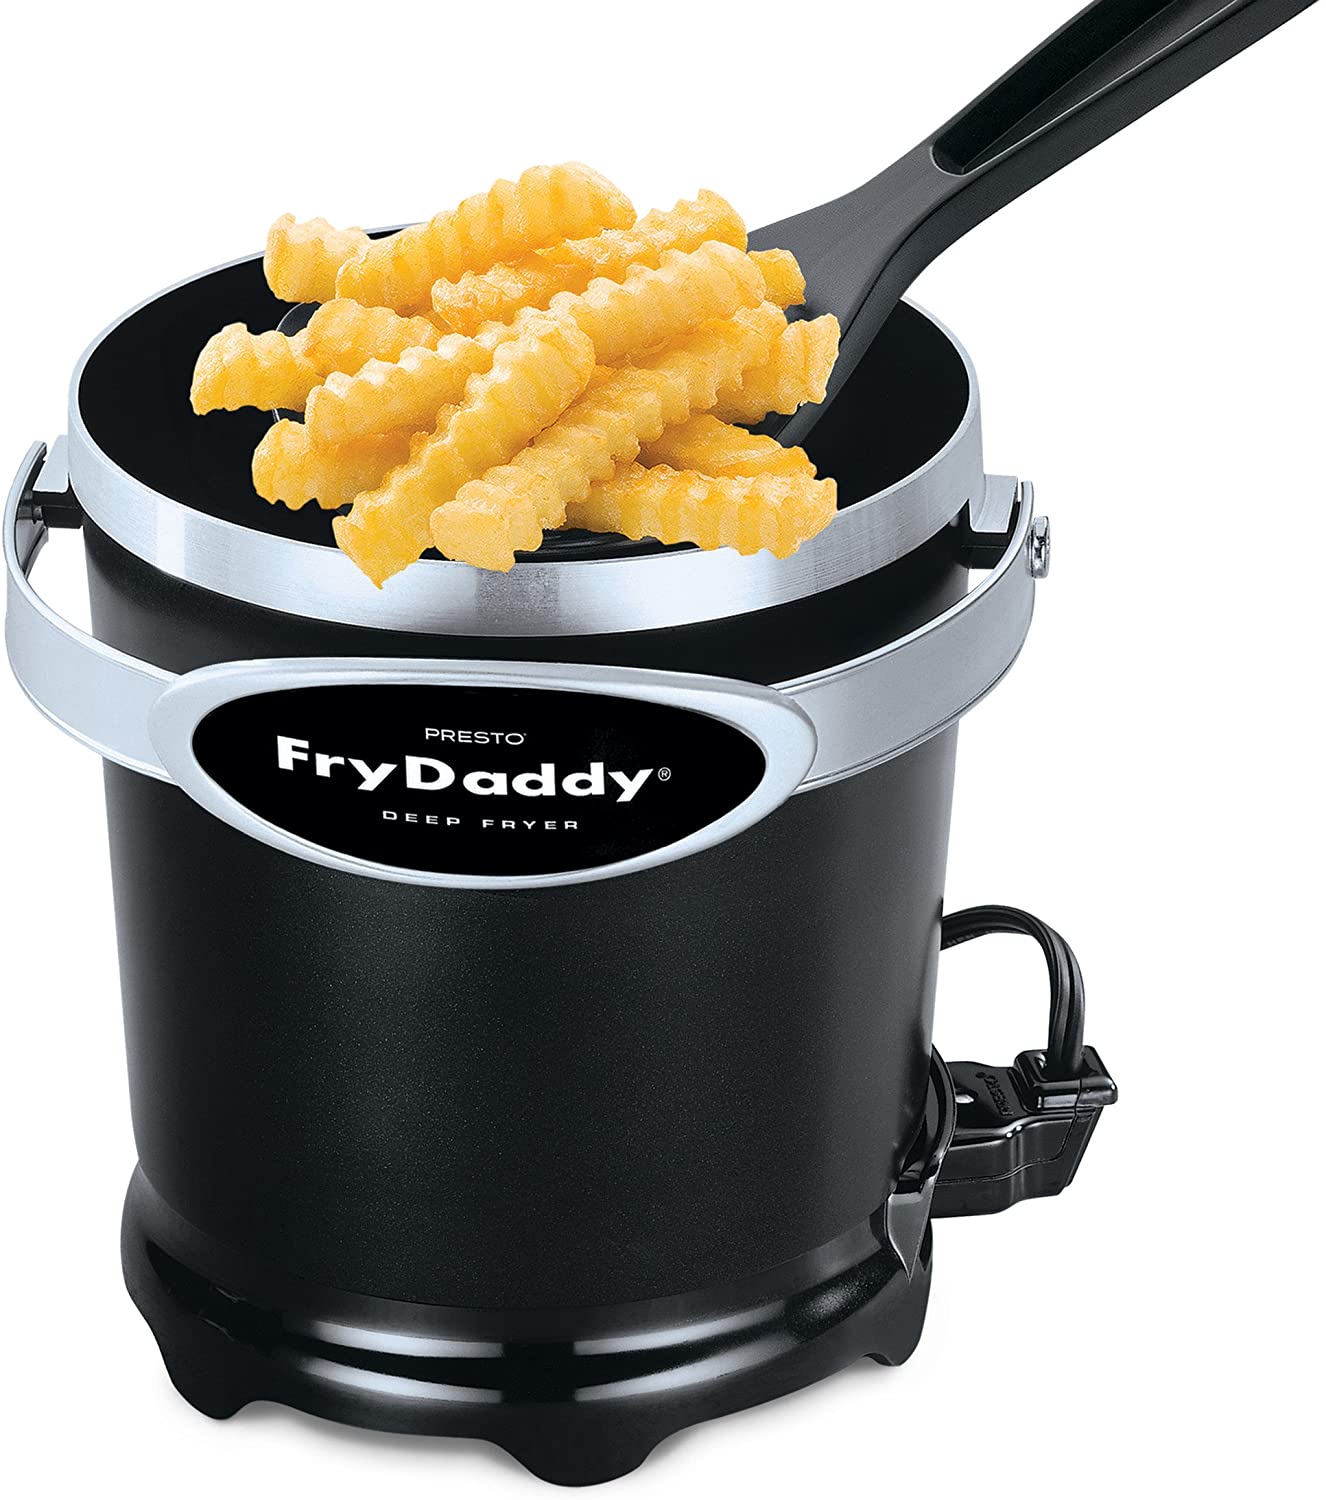 Presto Curly Fries Cutter Review